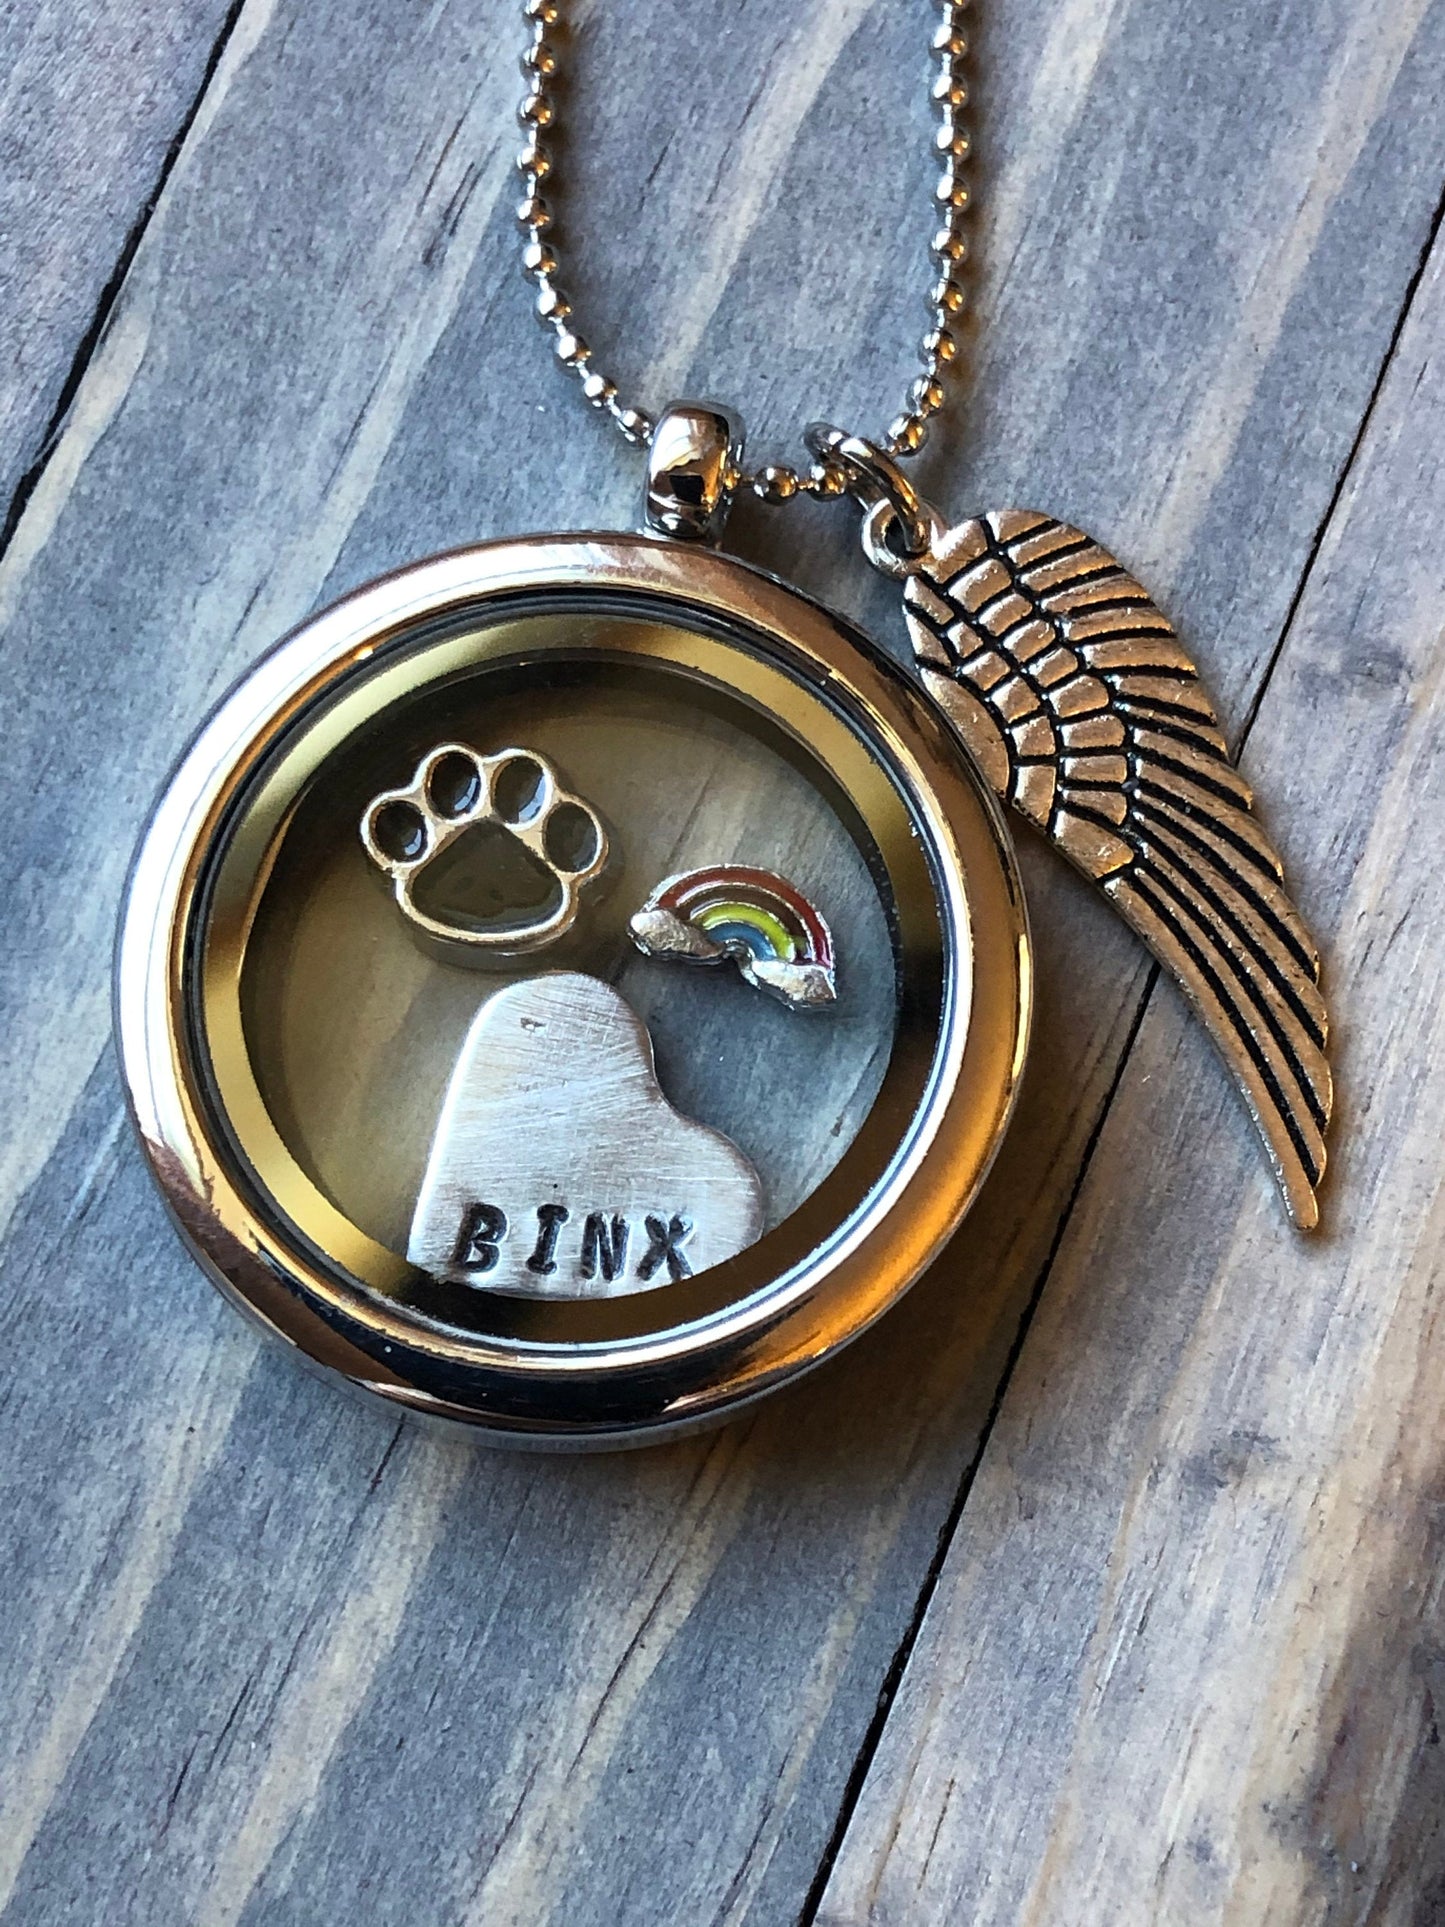 Pet Loss Necklace, Pet Memorial Gift, Glass Floating Locket for Fur Ashes Picture, Loss of Pet, Gift for Loss of Dog, pet remembrance